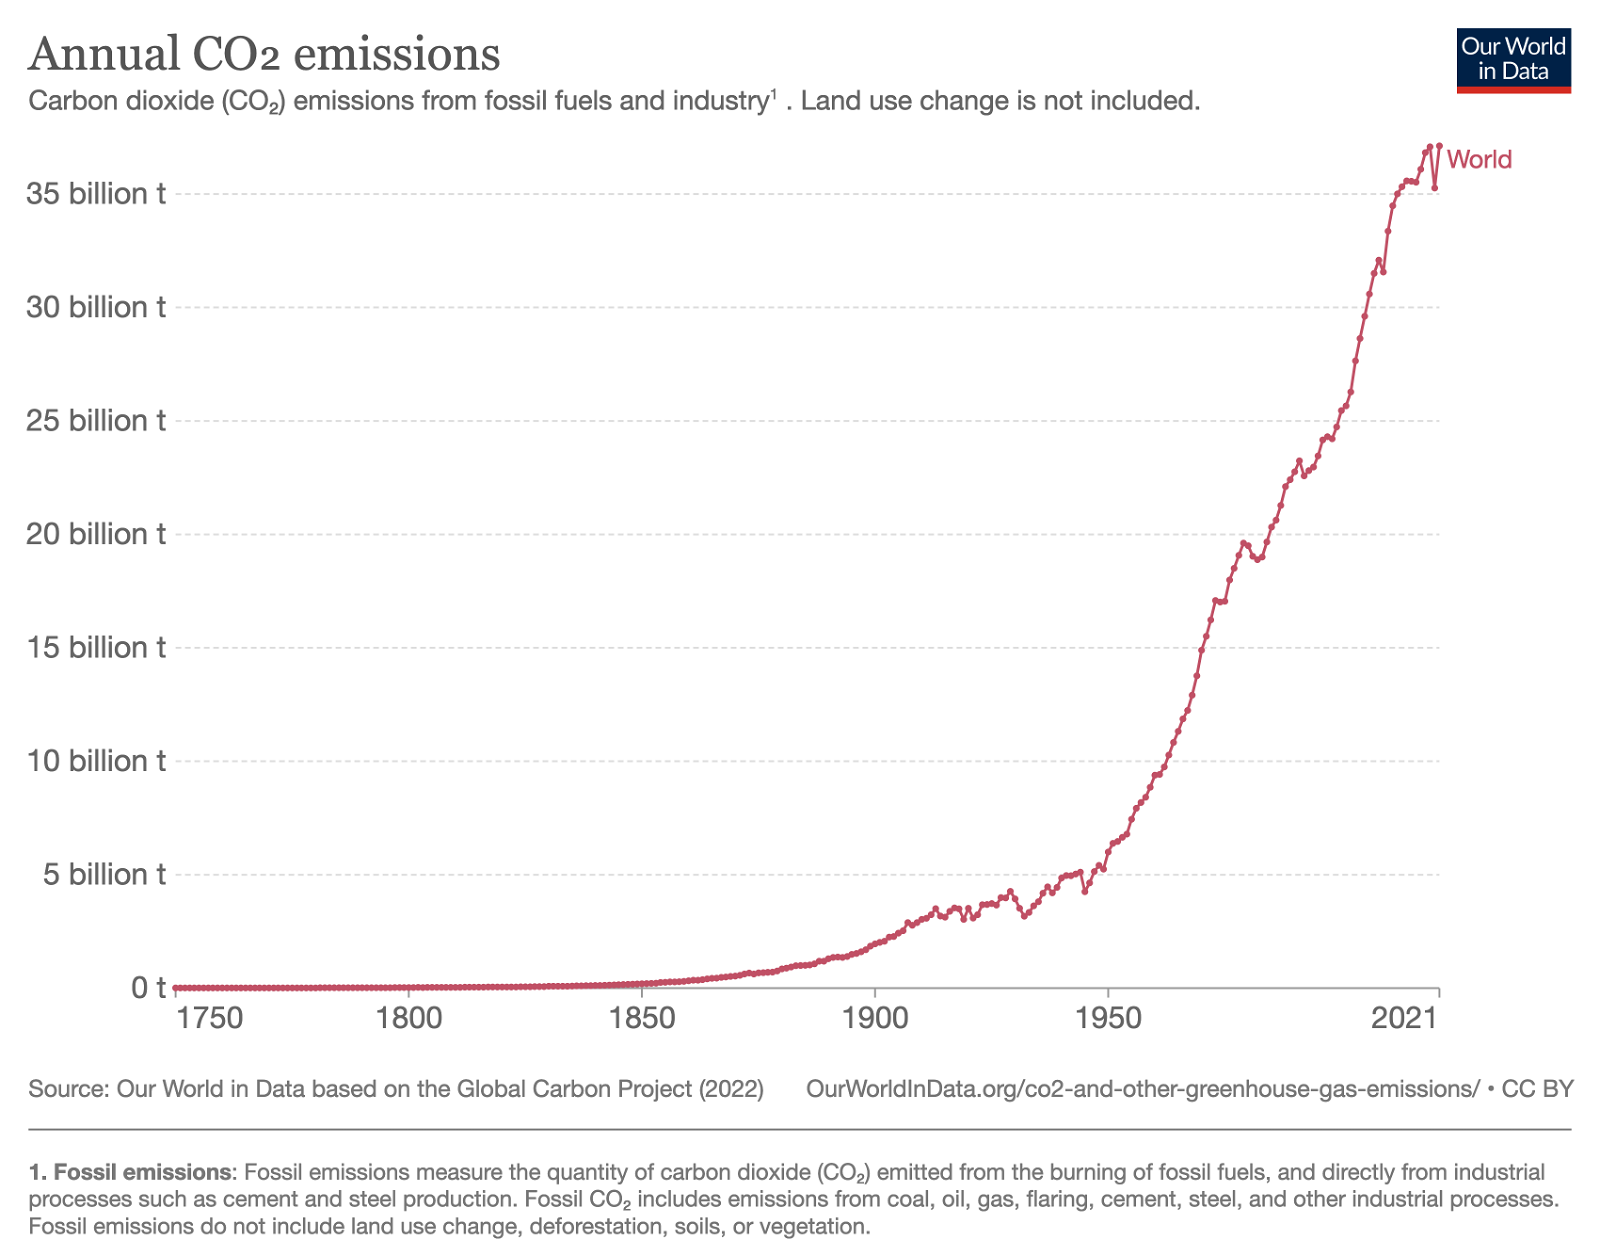 Figure 1: Globally, CO2 emissions continue to rise year on year, with very few exceptions, 2009 and 2020 being the only years in the last two decades that emissions have fallen, both associated with economic downturn.